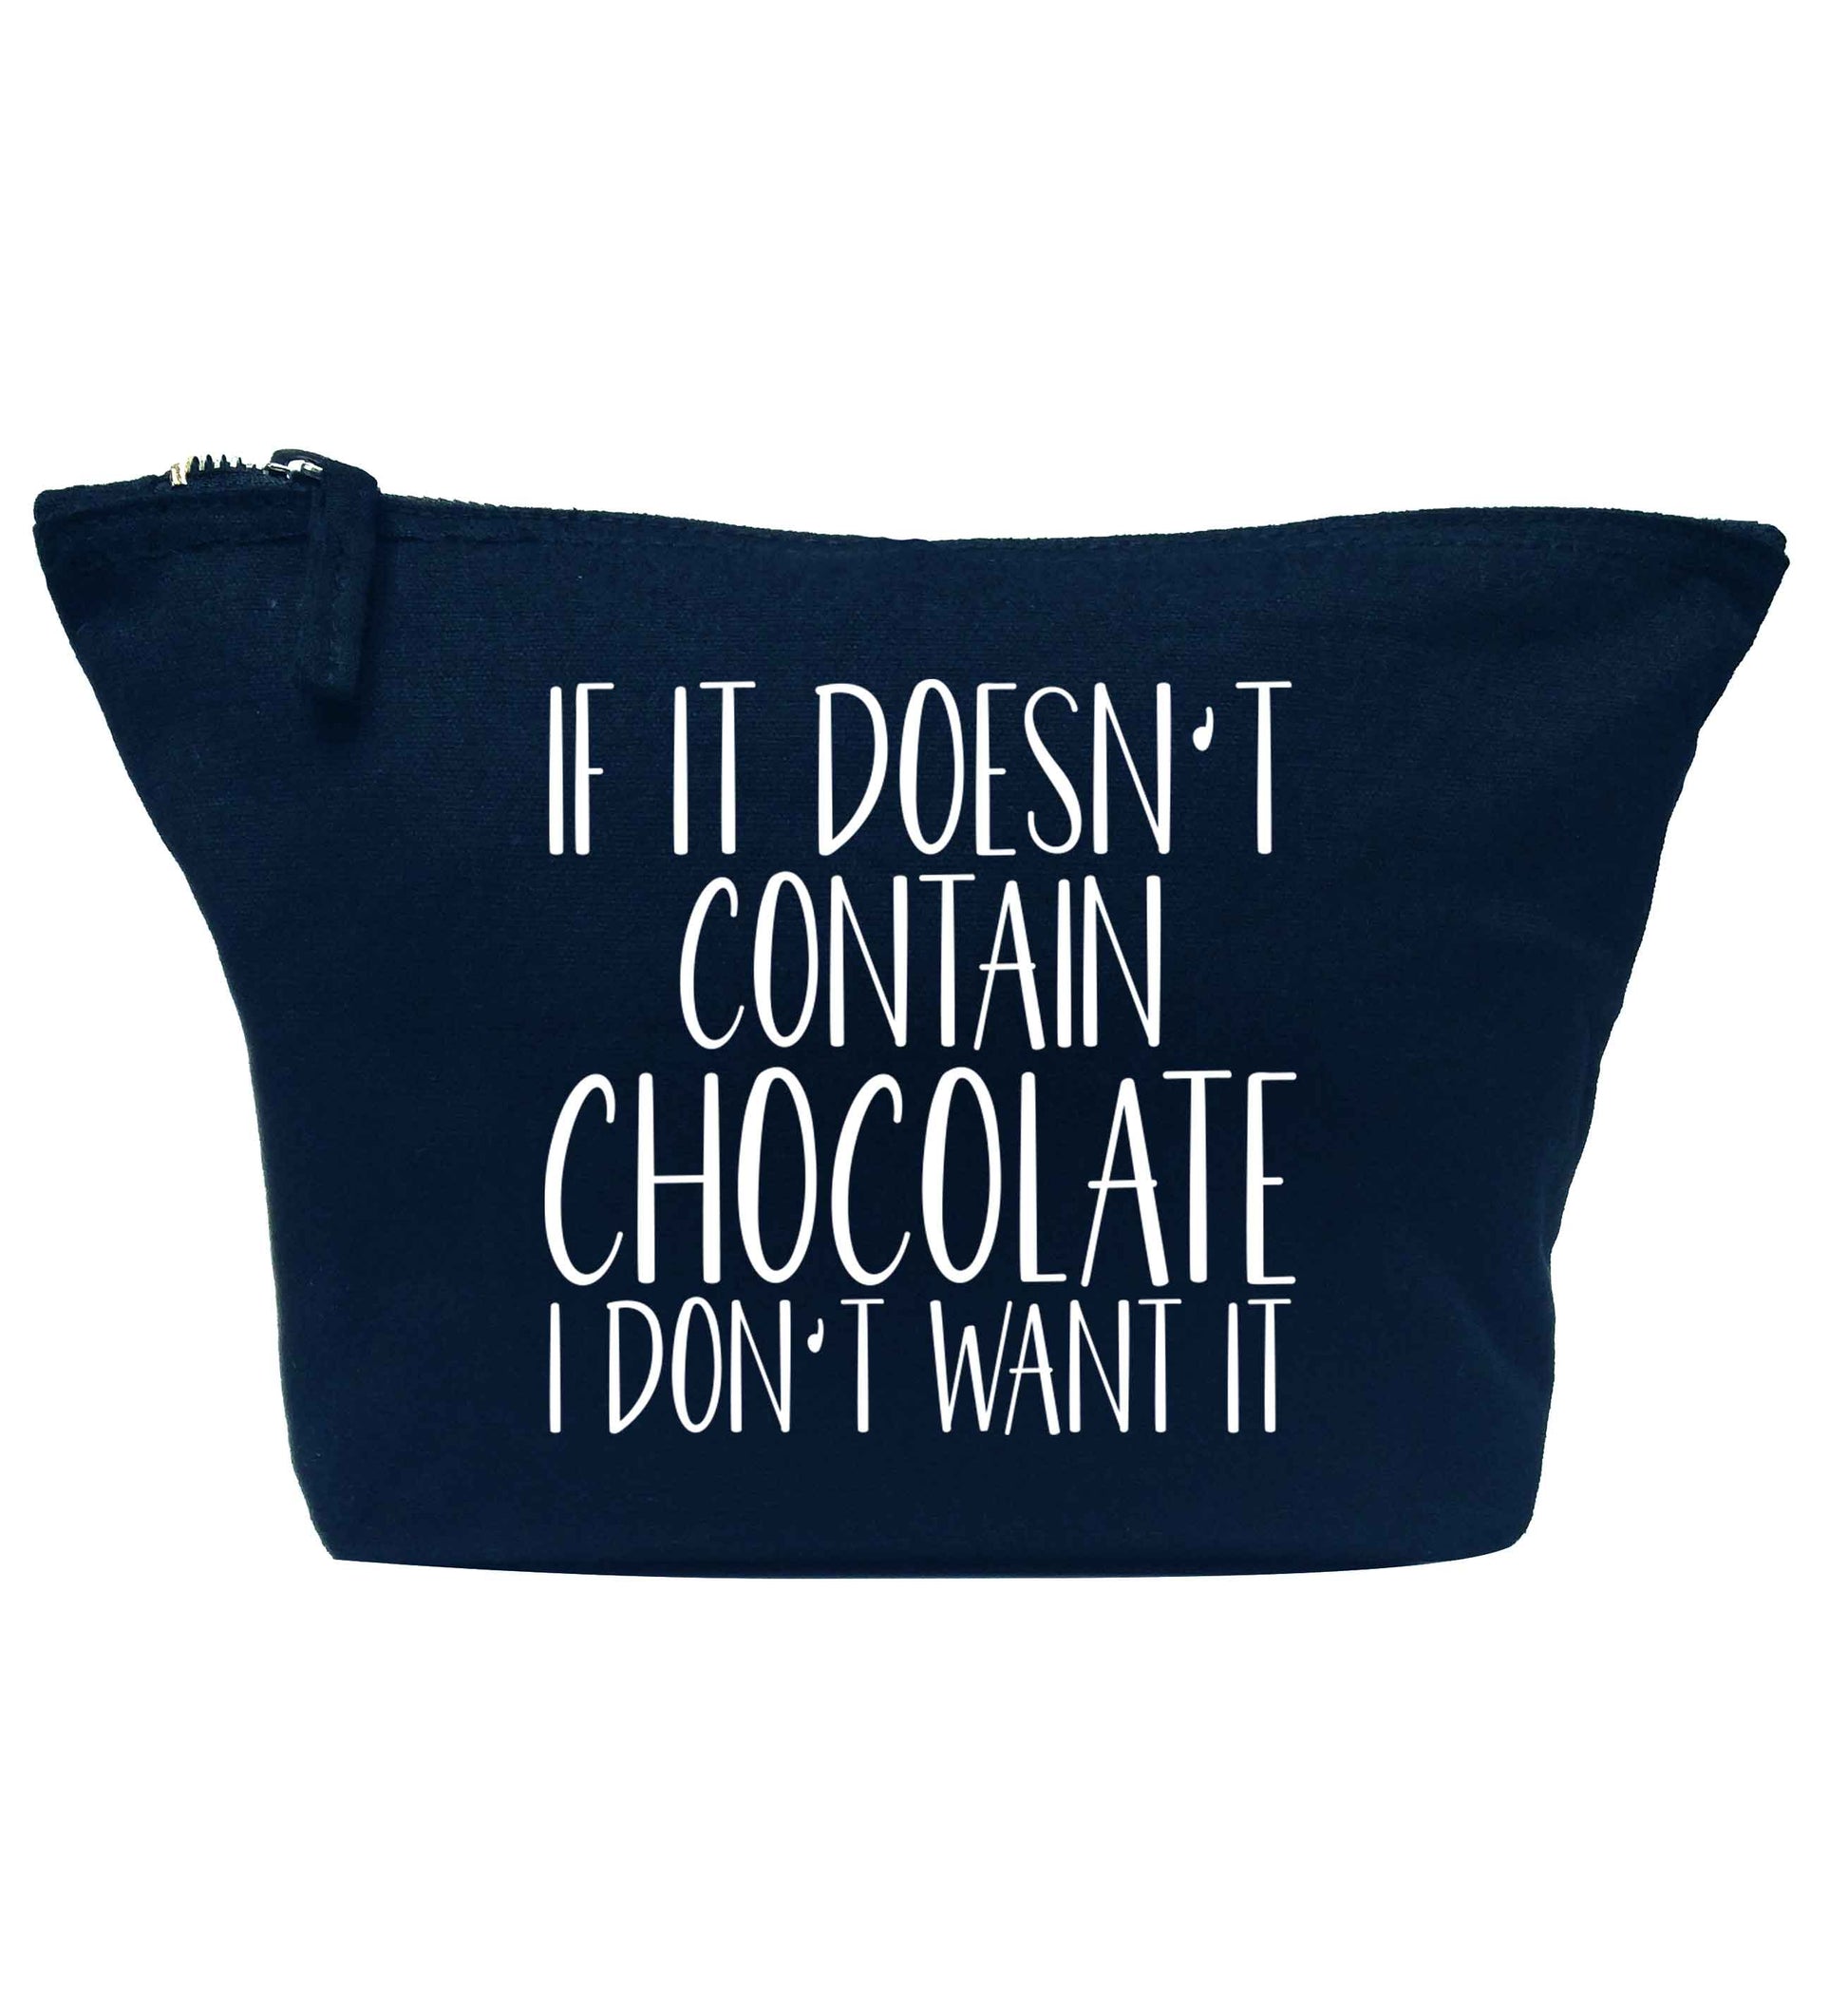 If it doesn't contain chocolate I don't want it navy makeup bag